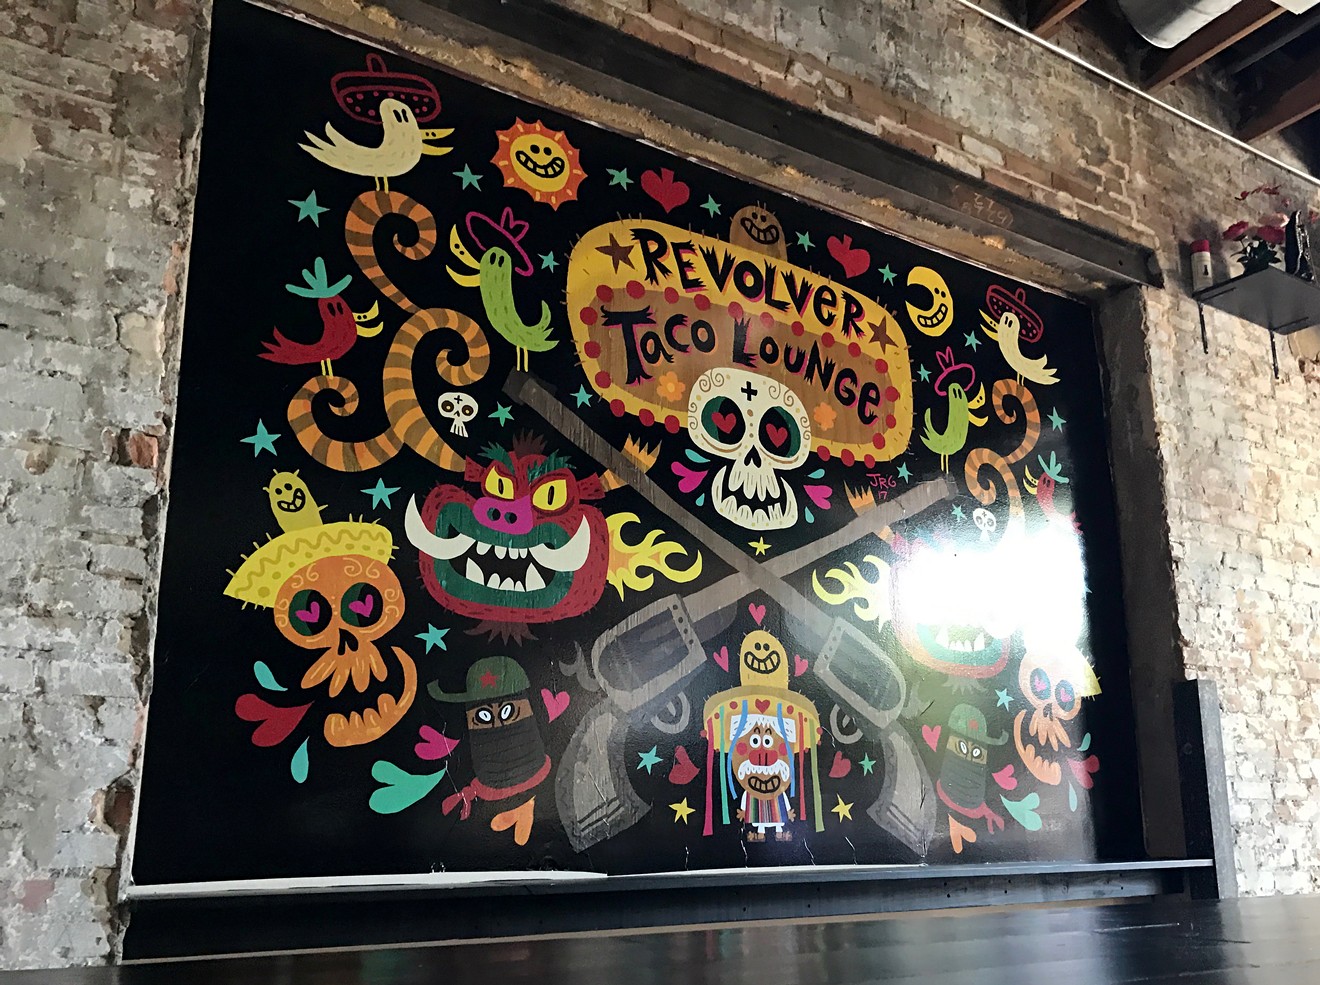 The first thing you'll notice when entering the new Revolver Taco Lounge is the massive mural by Deep Ellum-based artist Jorge R. Gutierrez.